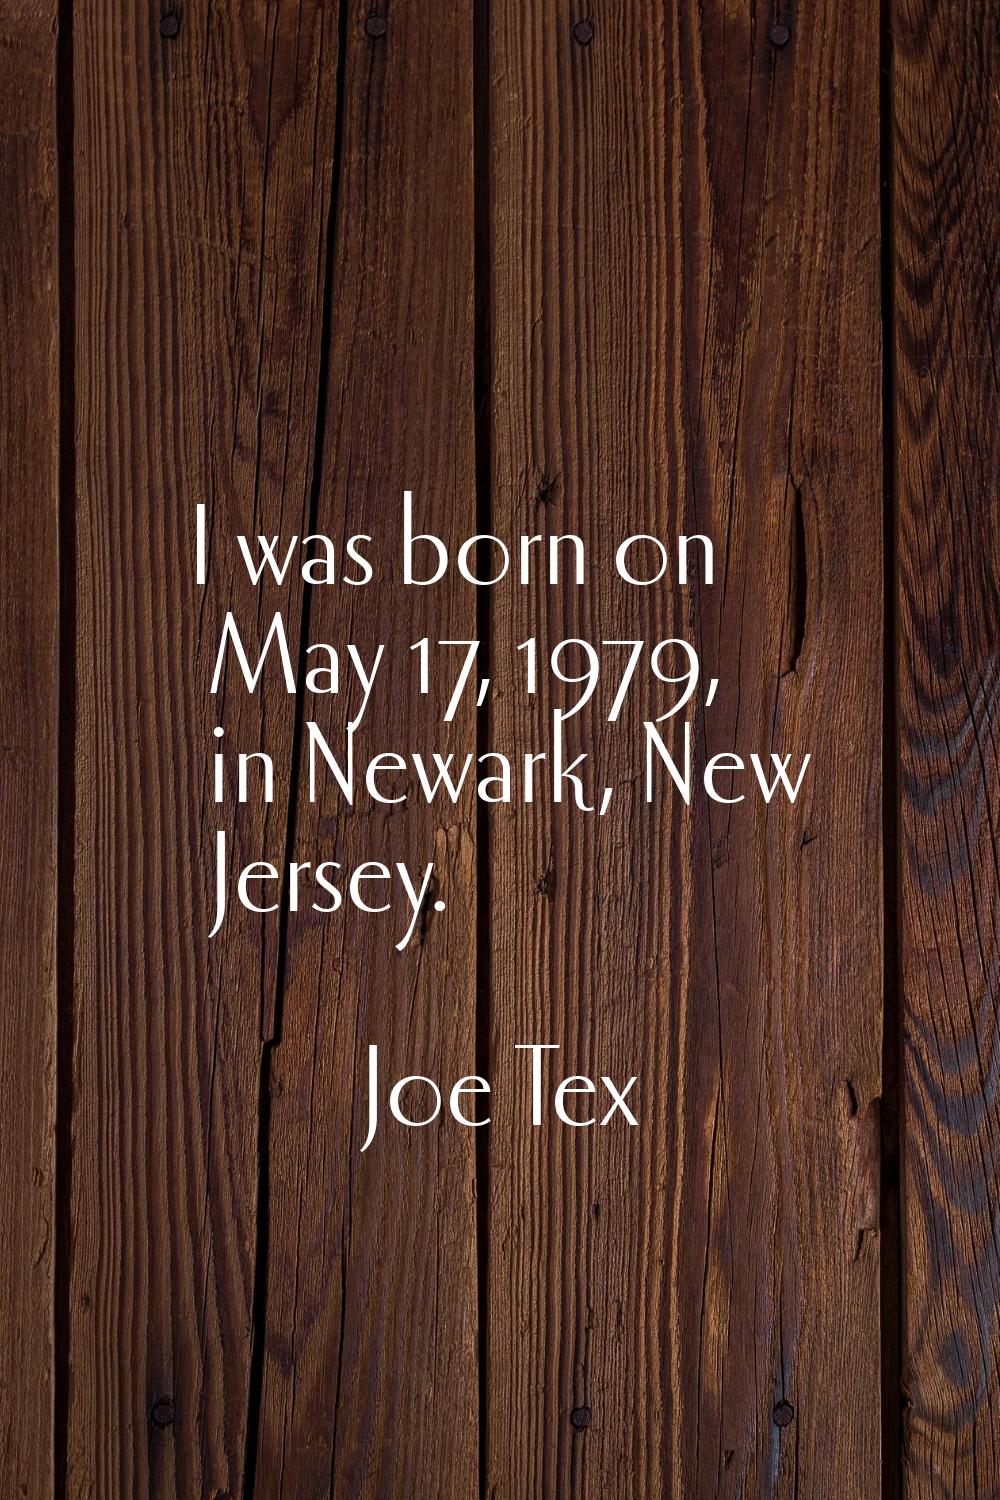 I was born on May 17, 1979, in Newark, New Jersey.